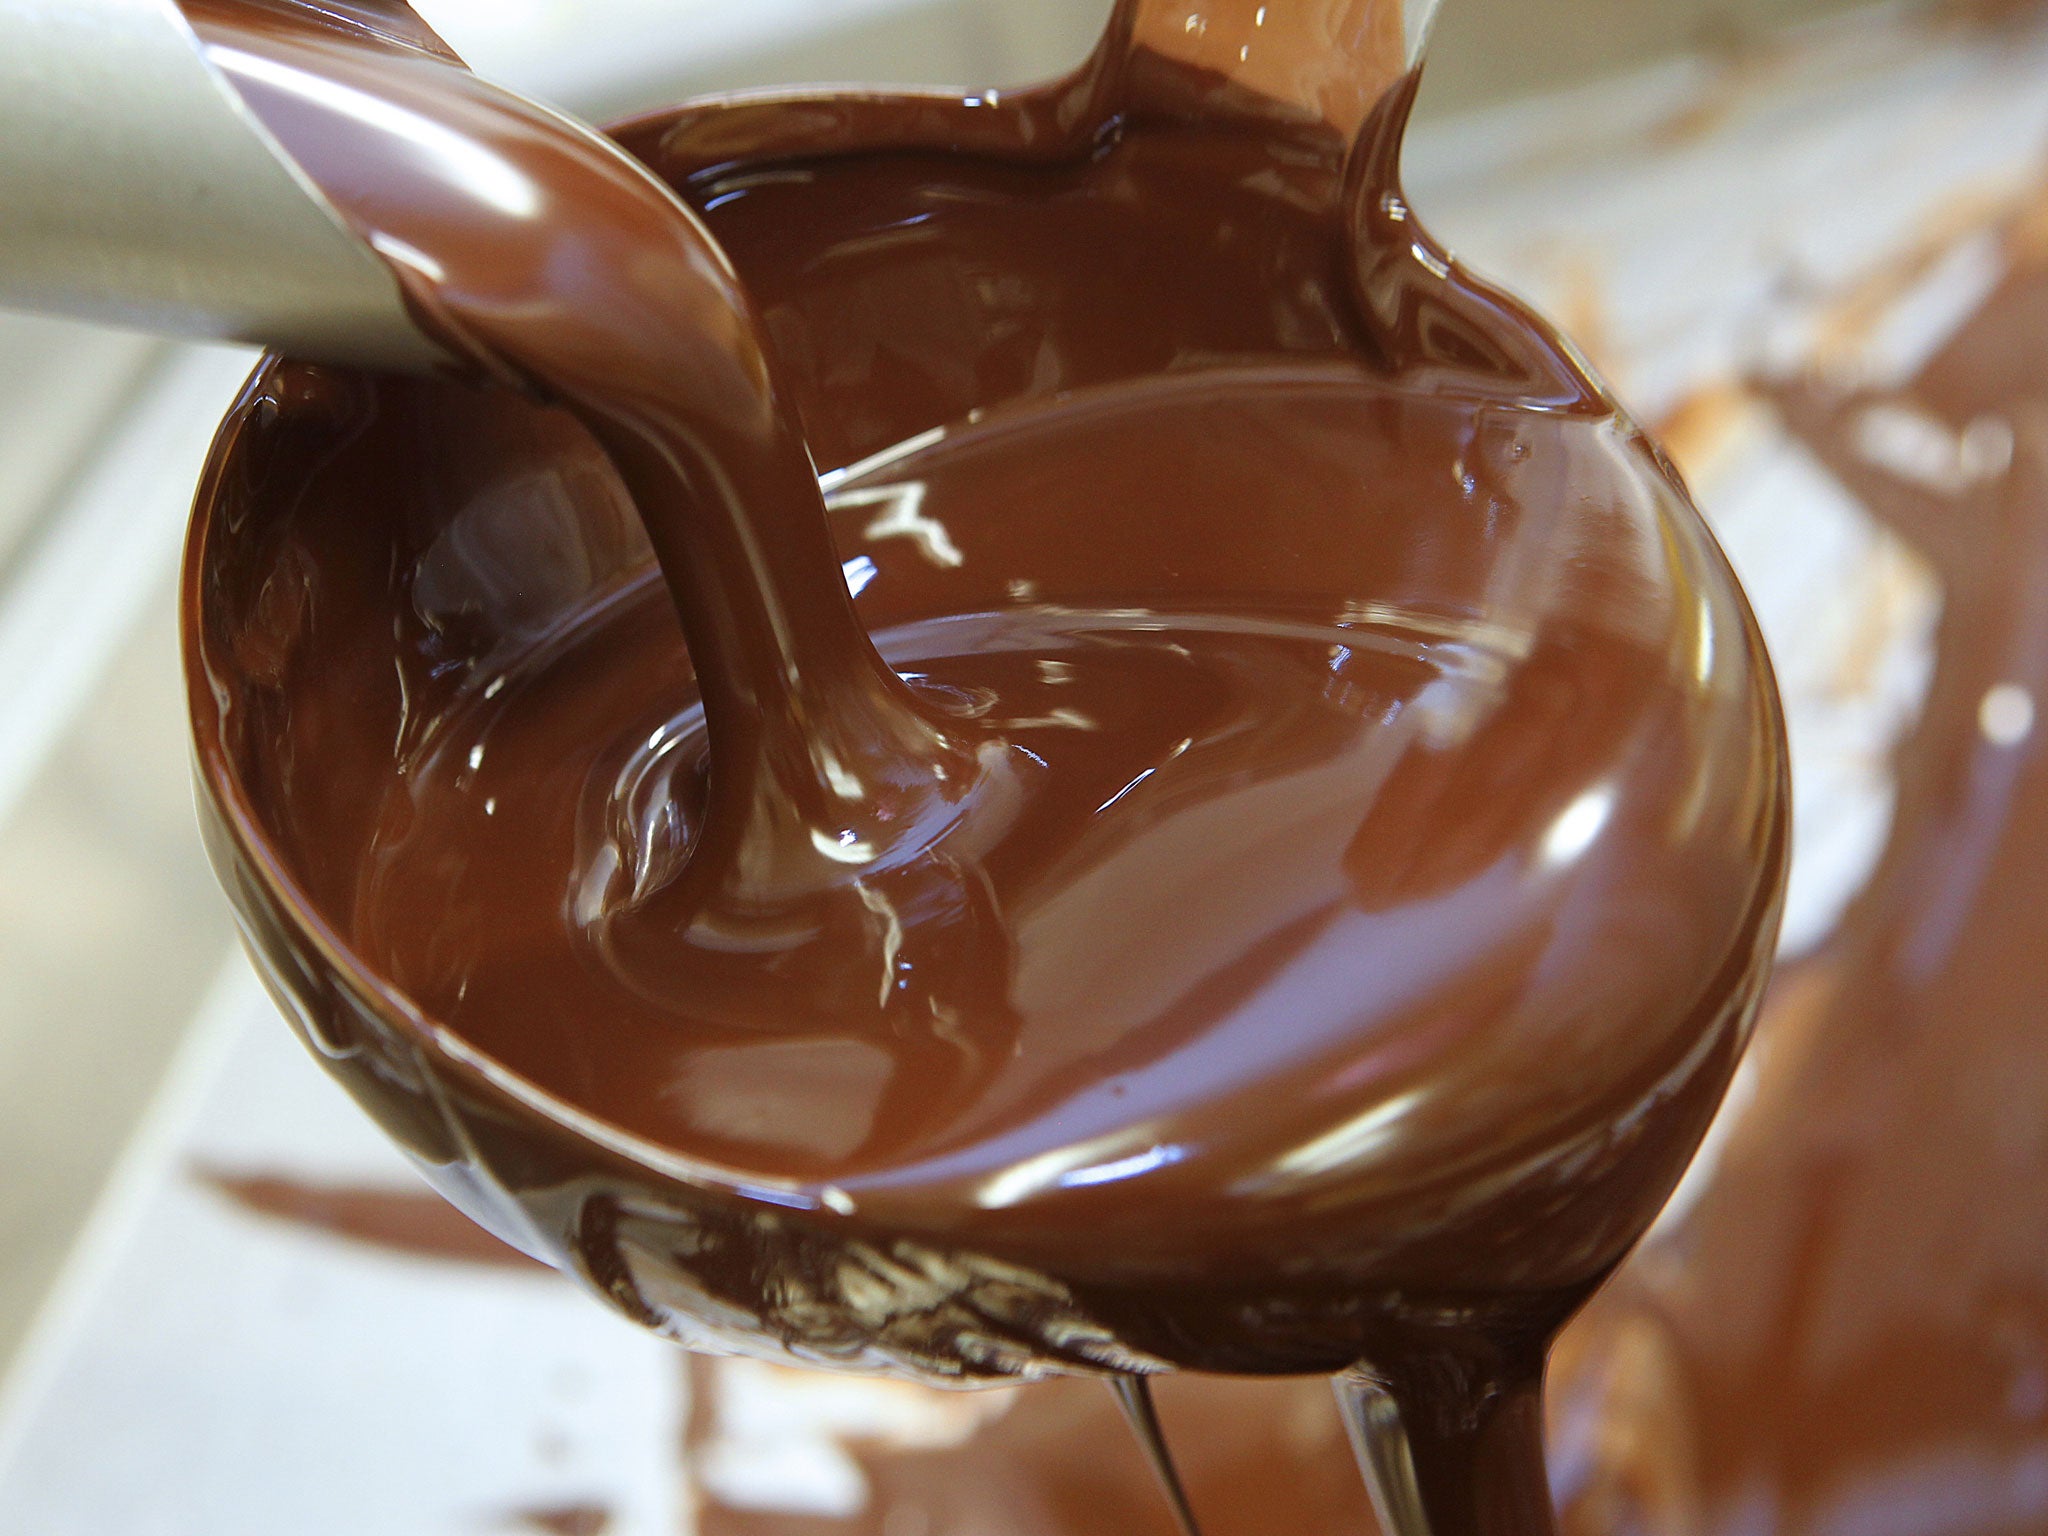 Melted chocolate is poured